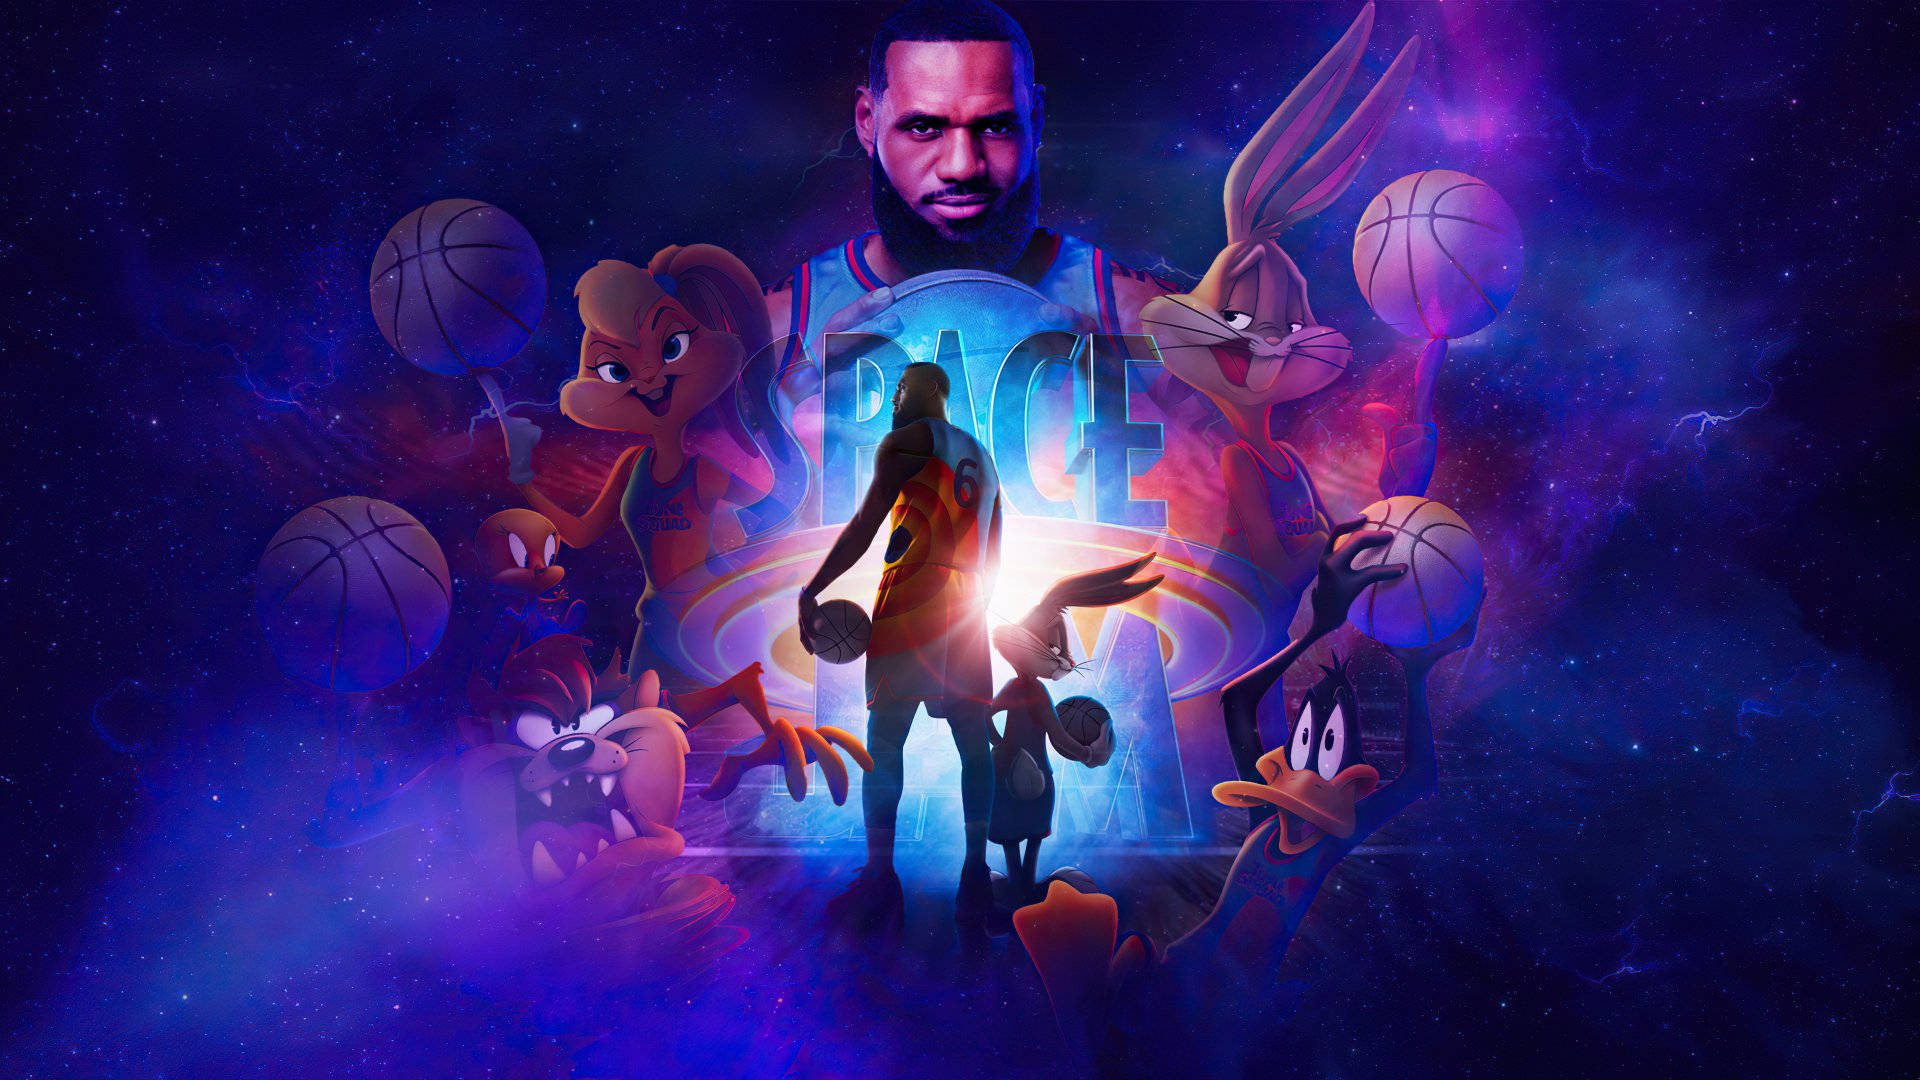 Get ready for an epic Slam Dunk with Space Jam 2! Wallpaper